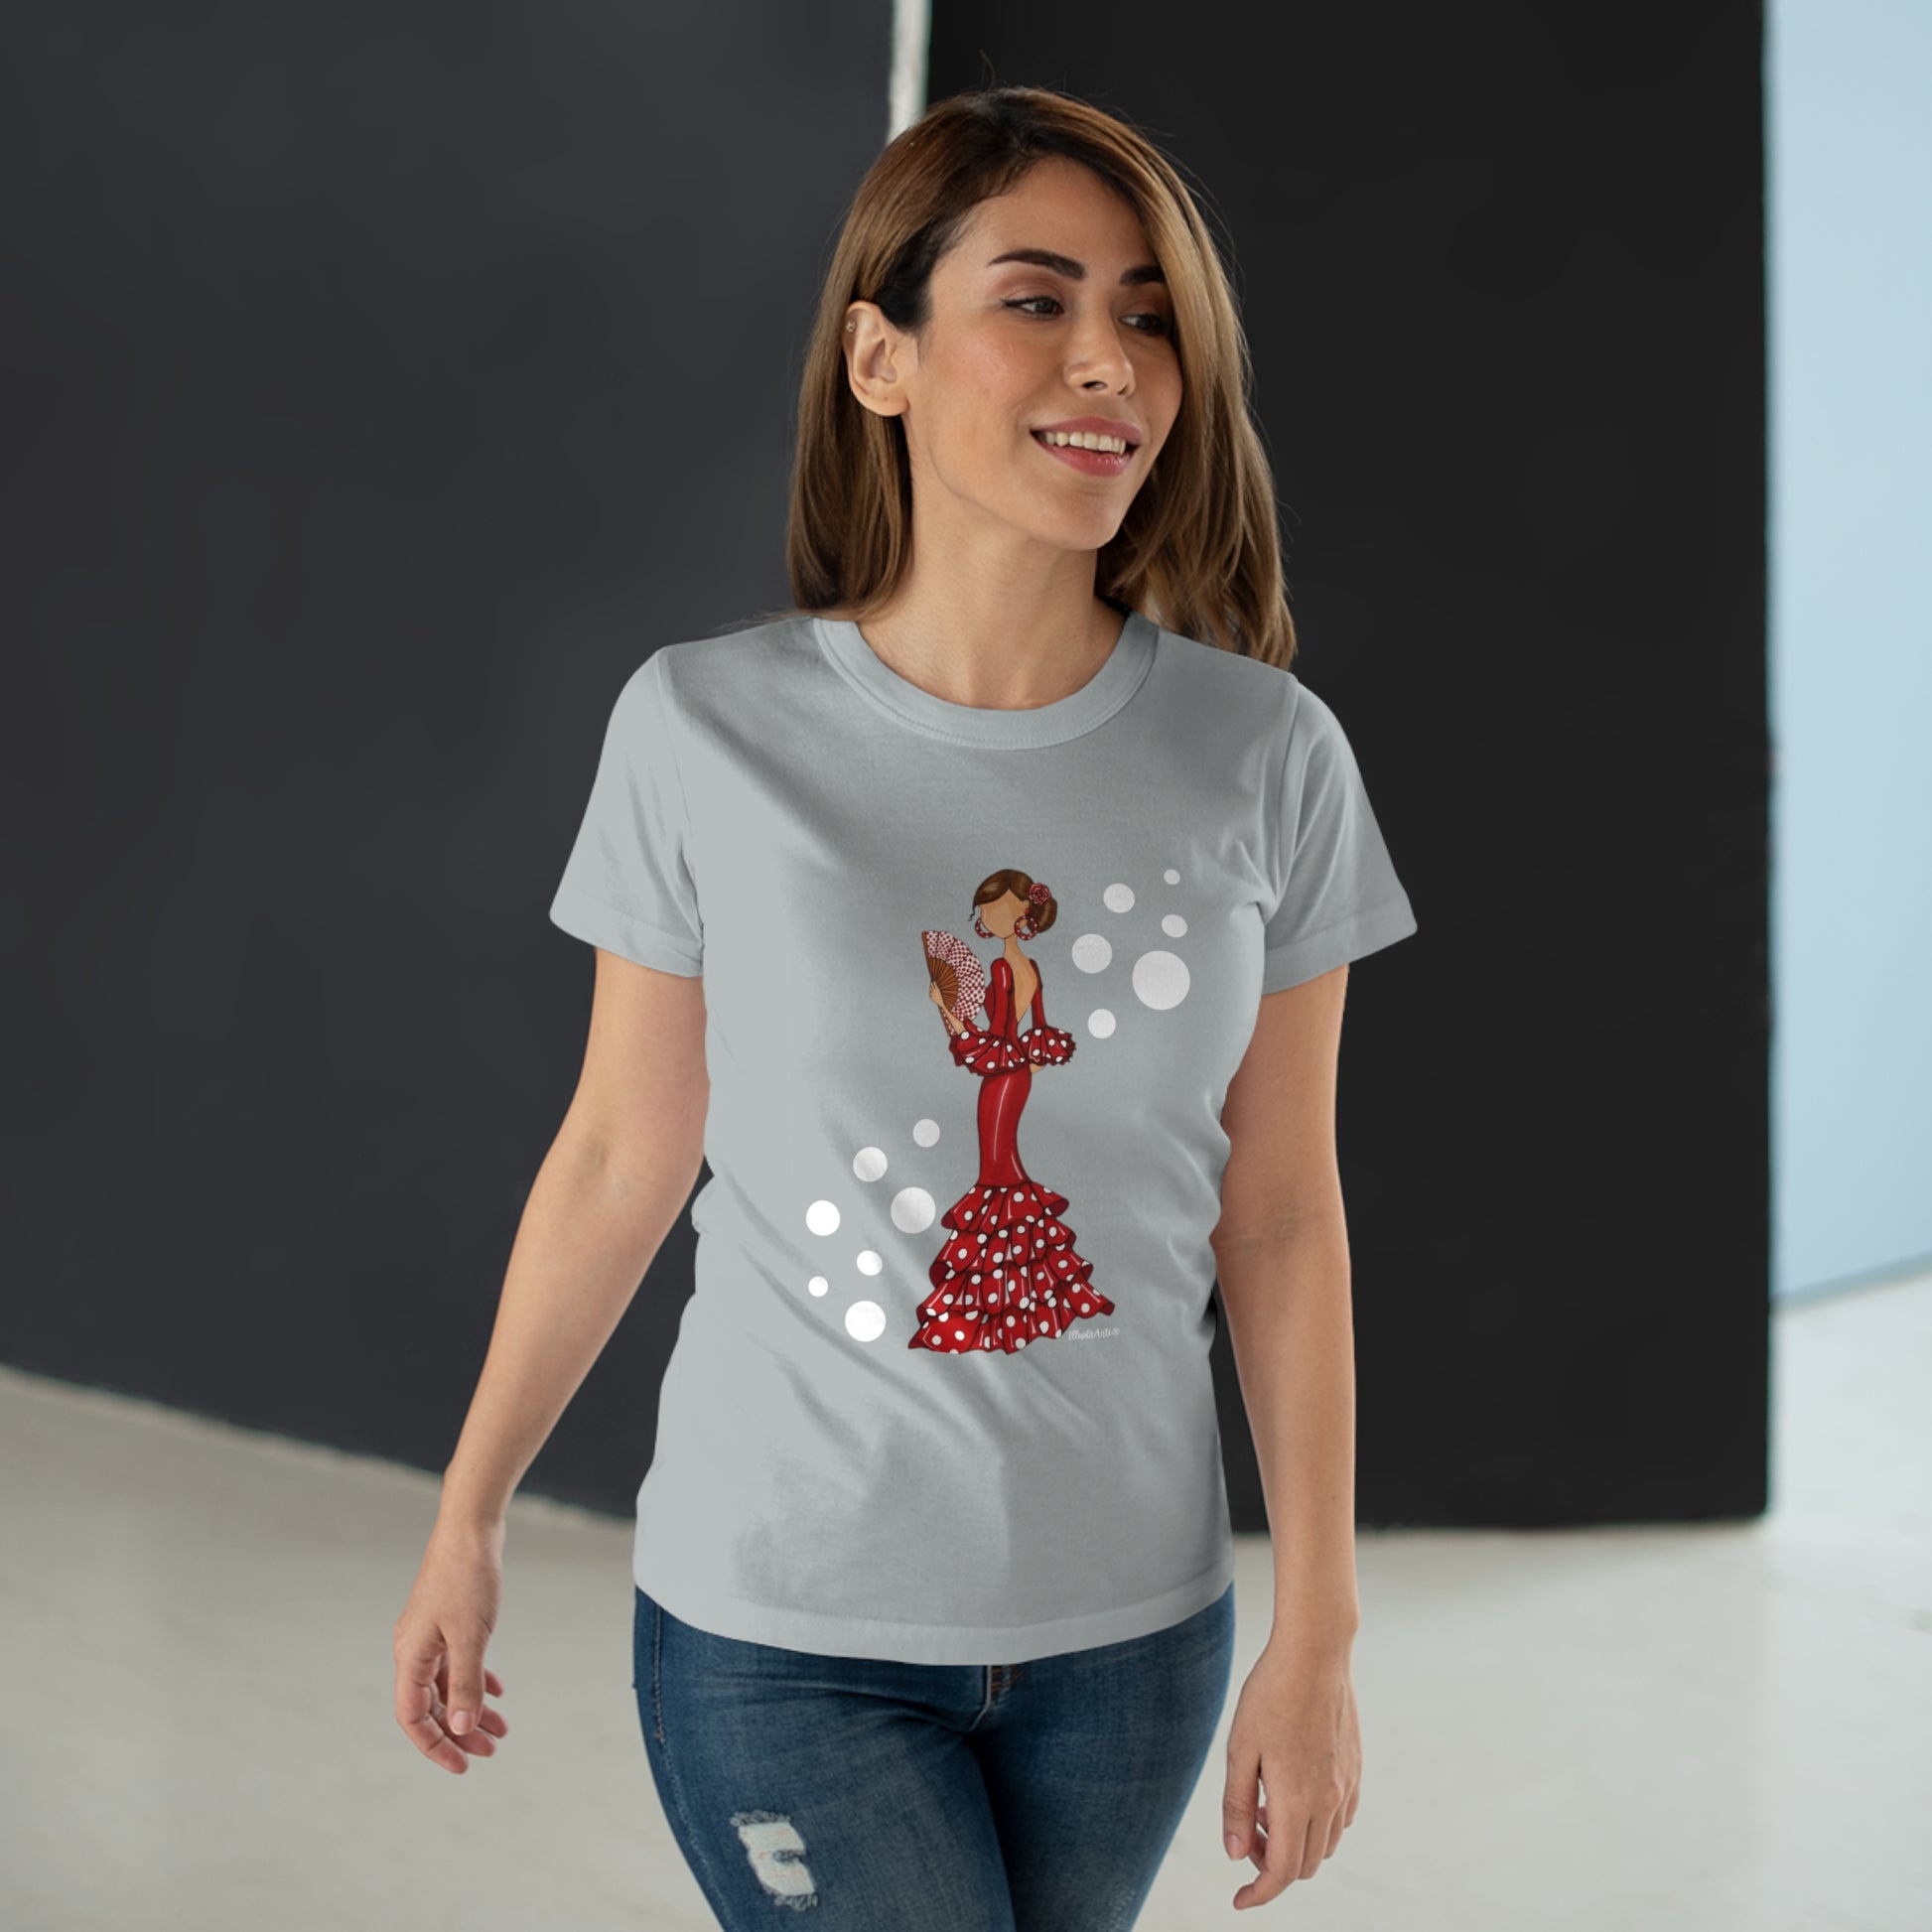 a woman wearing a t - shirt with a picture of a woman in a red